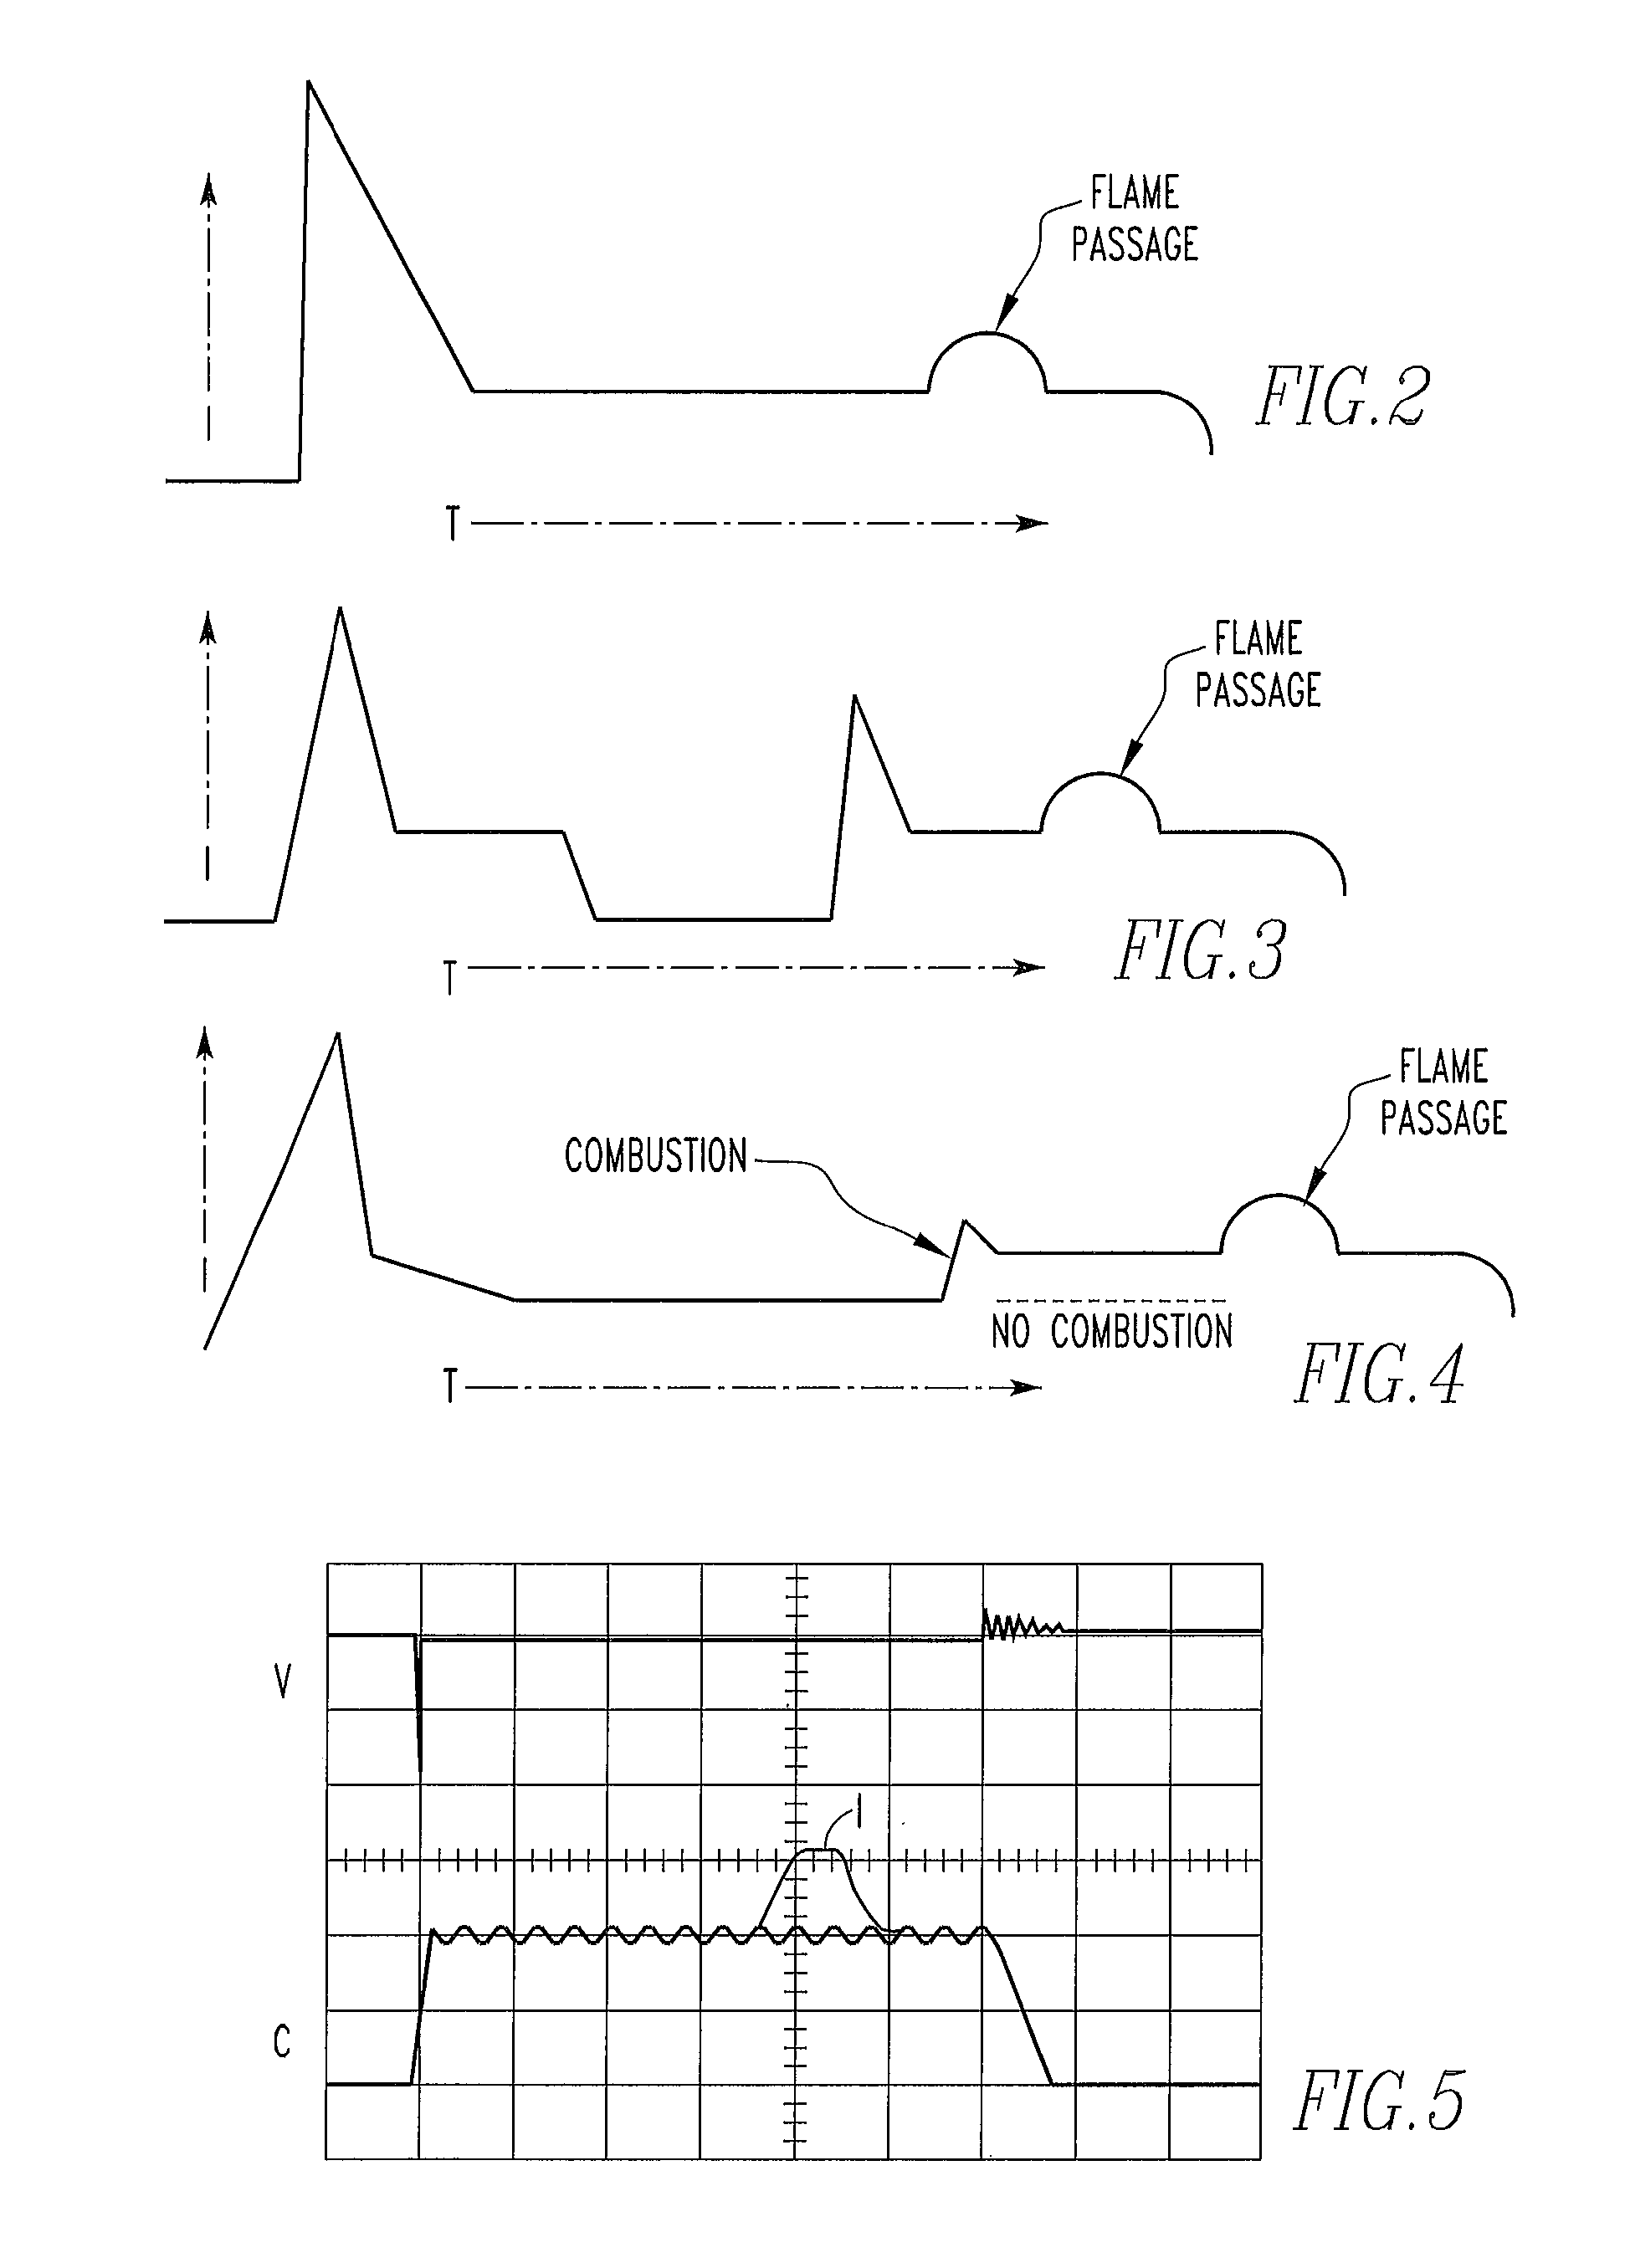 Ion sensing method for capacitive discharge ignition